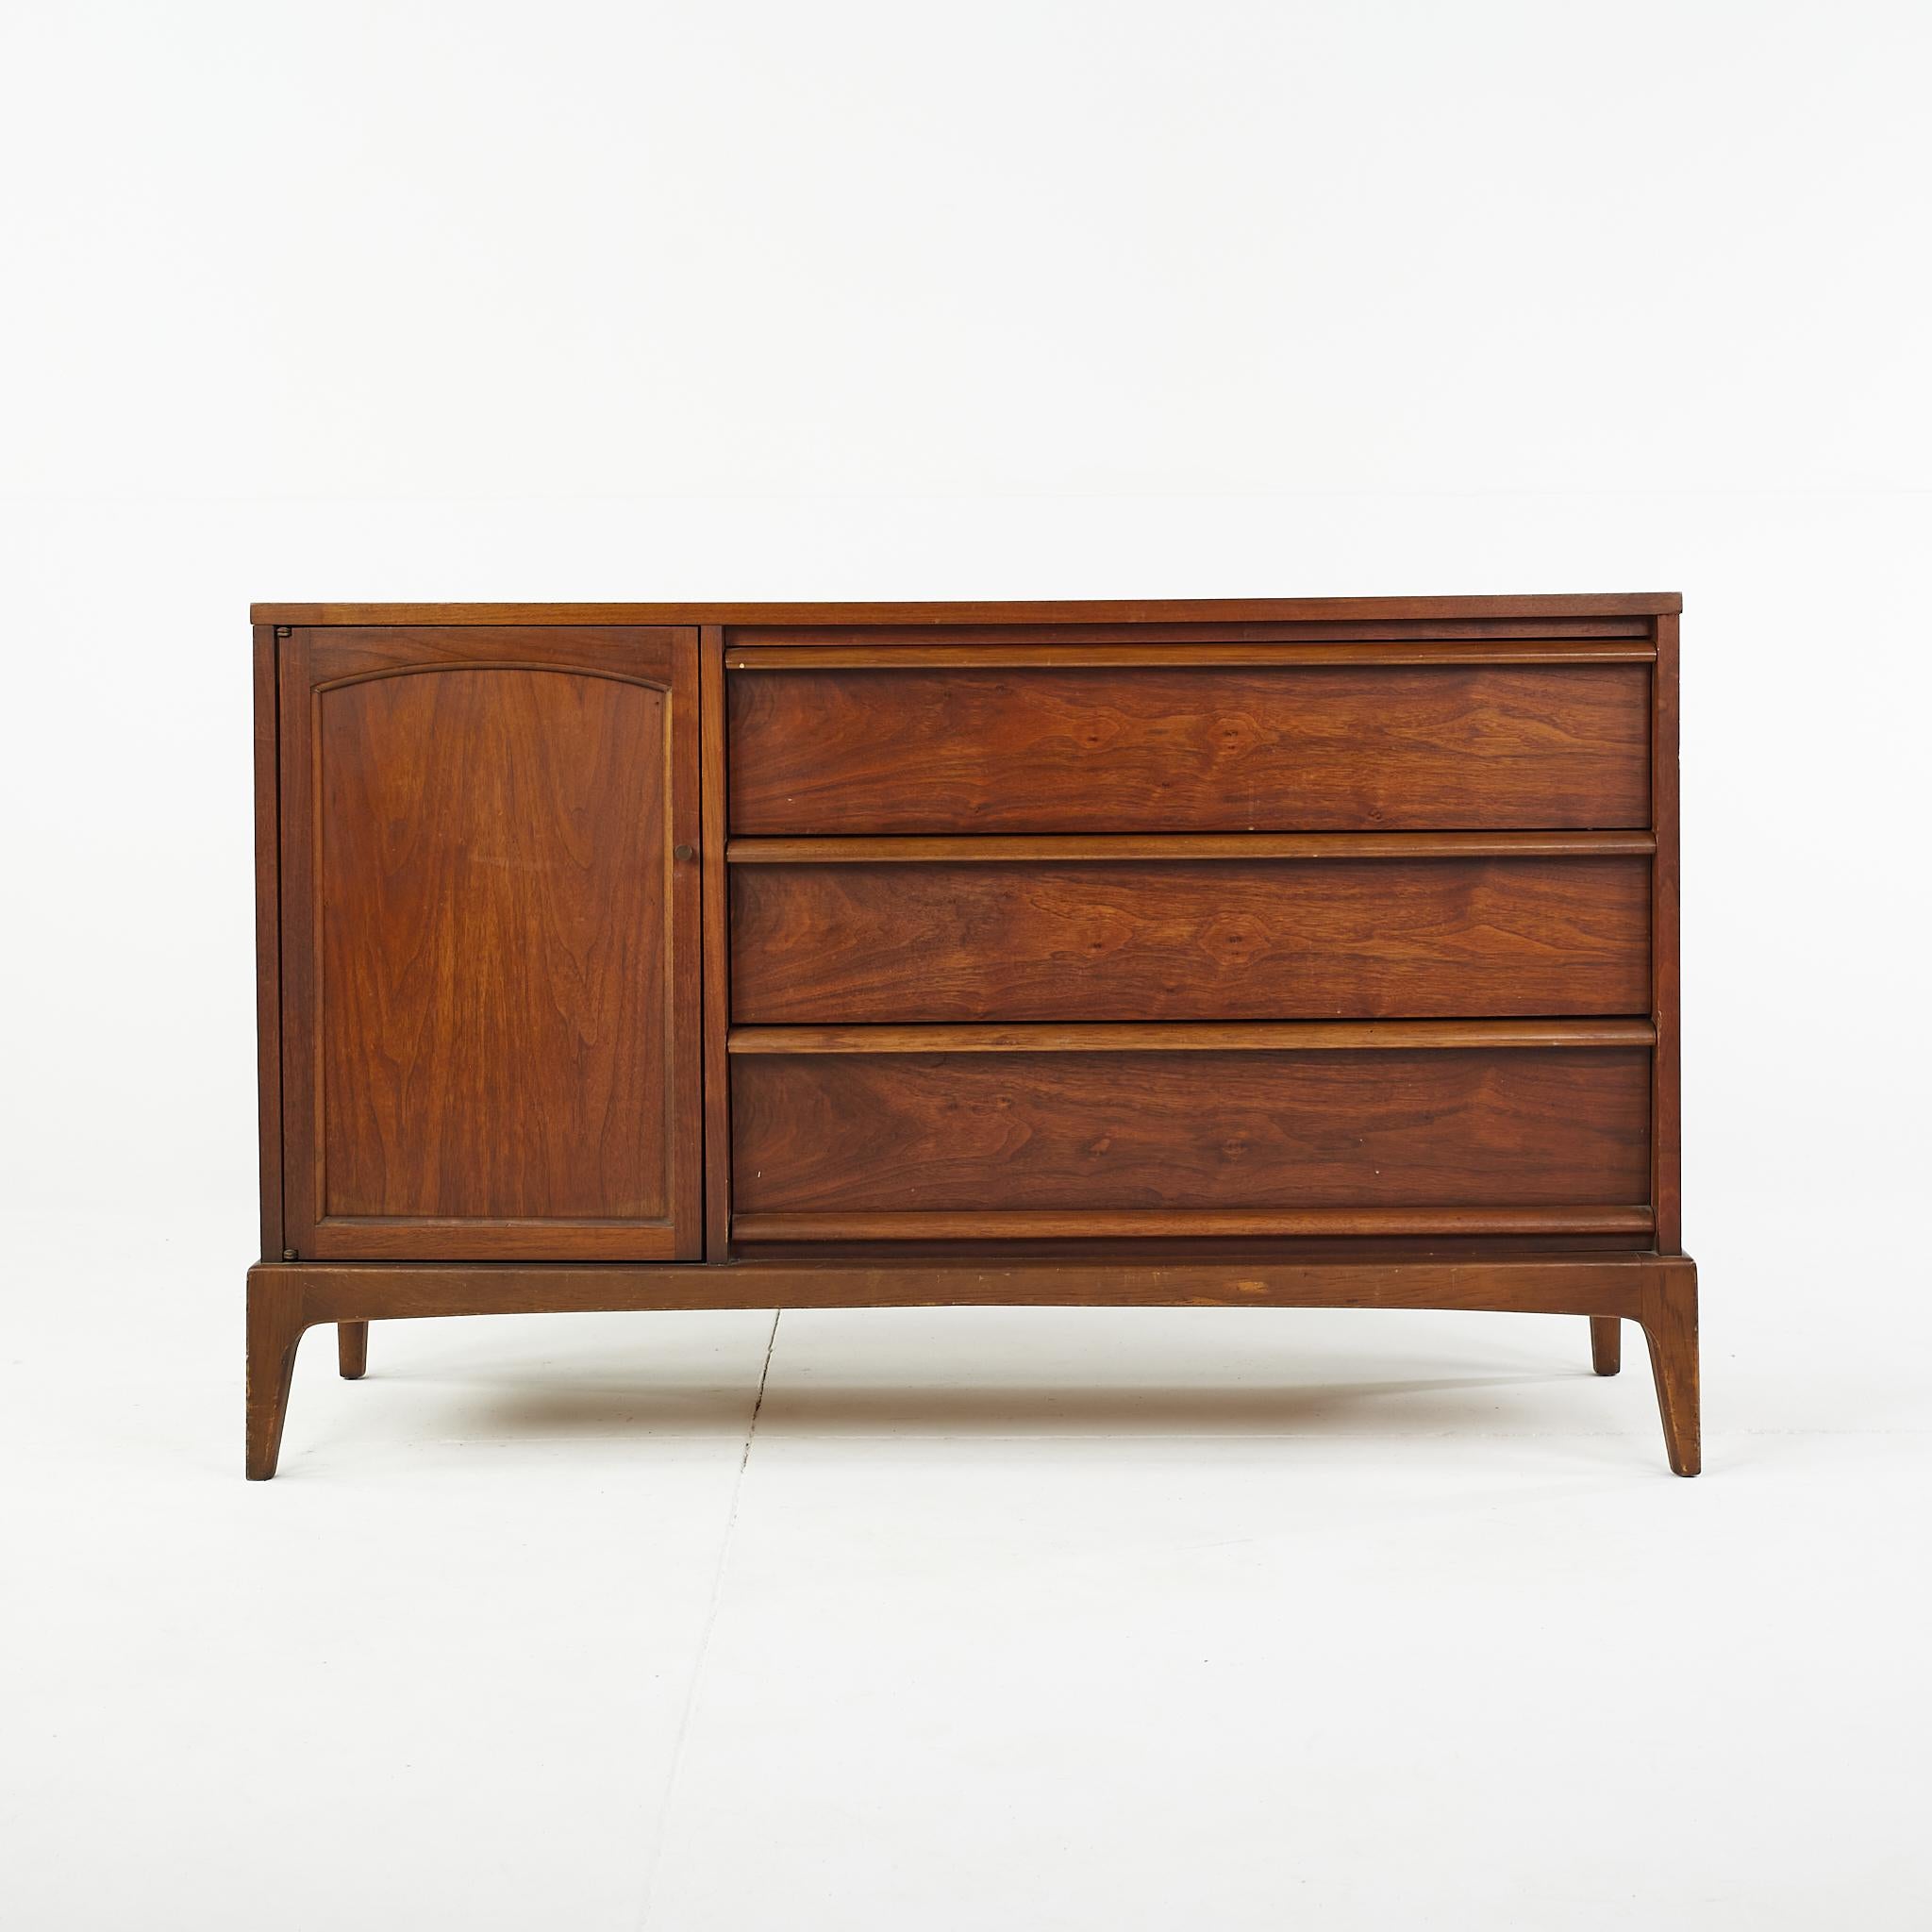 Lane rhythm mid-century reversible door walnut and cane buffet.

This buffet measures: 51.5 wide x 18.5 deep x 31 inches high.

All pieces of furniture can be had in what we call restored vintage condition. That means the piece is restored upon